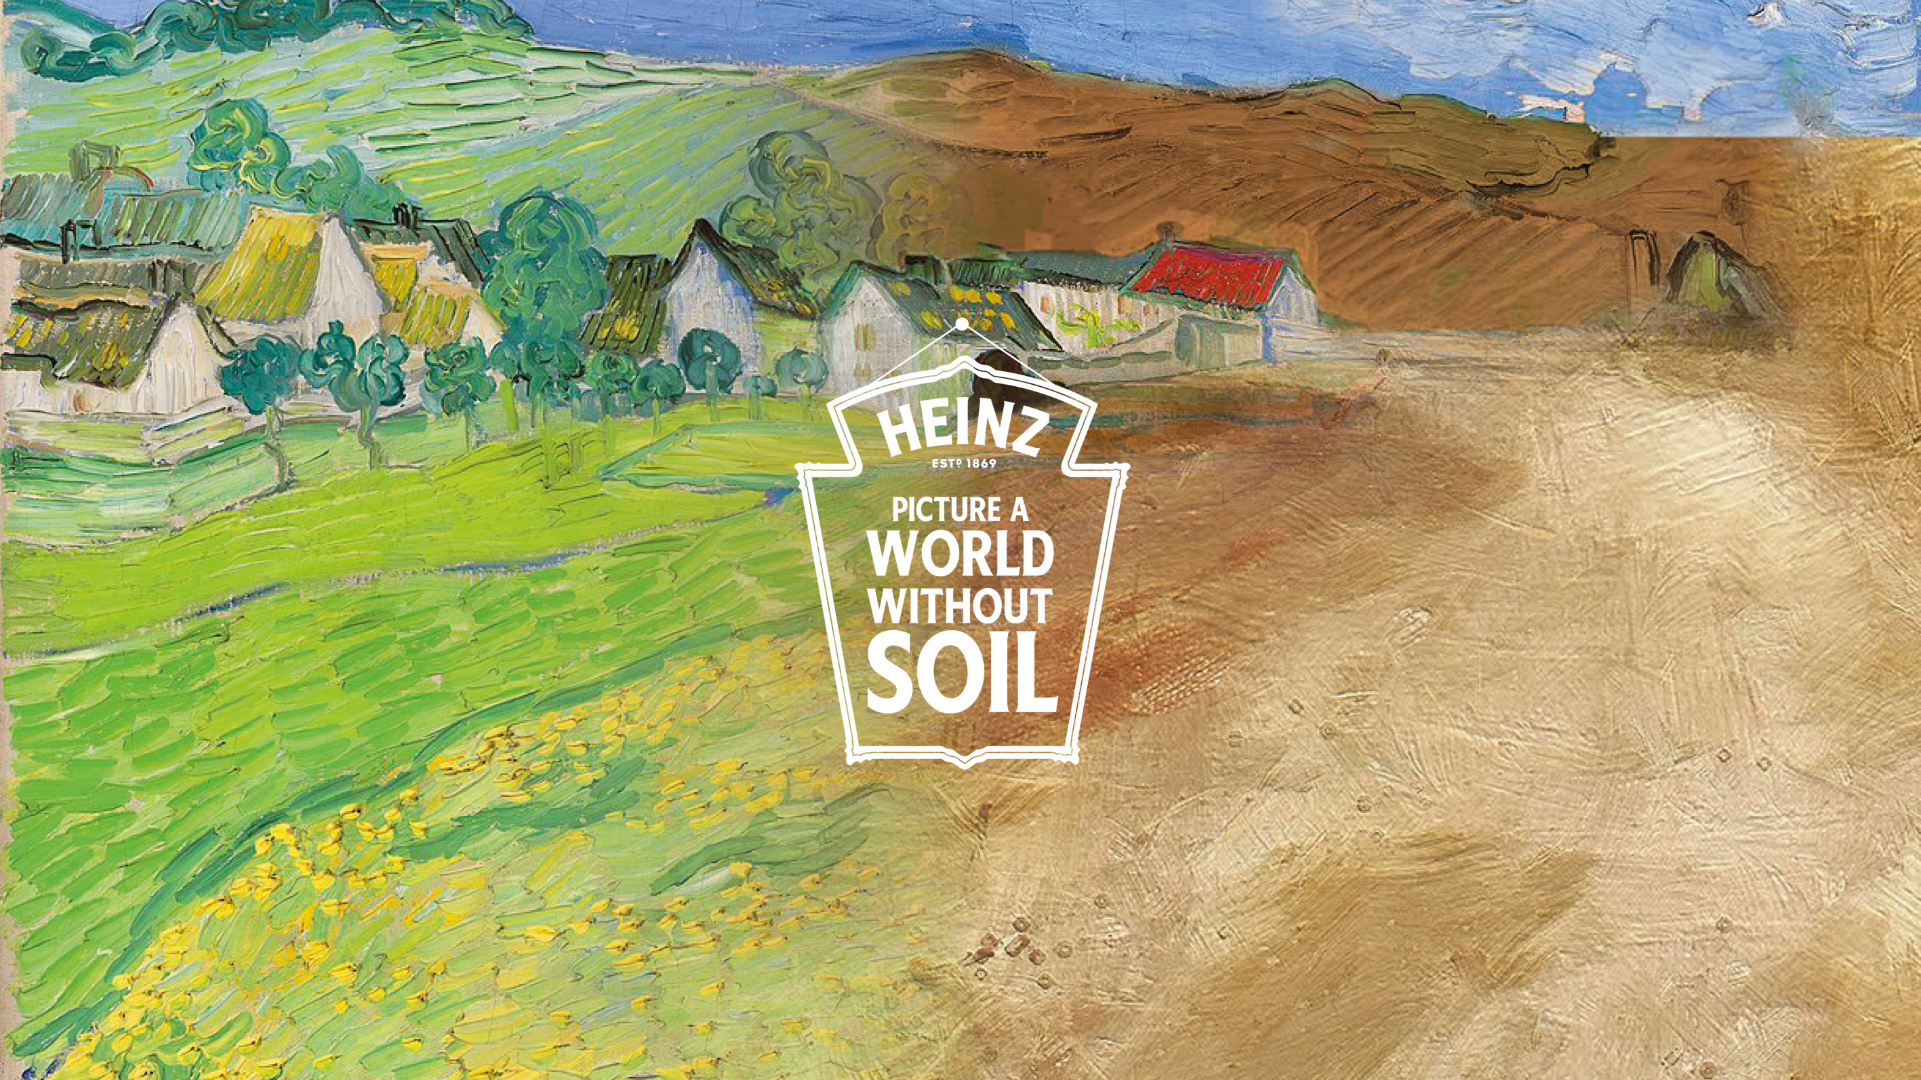 Heinz: Picture a World